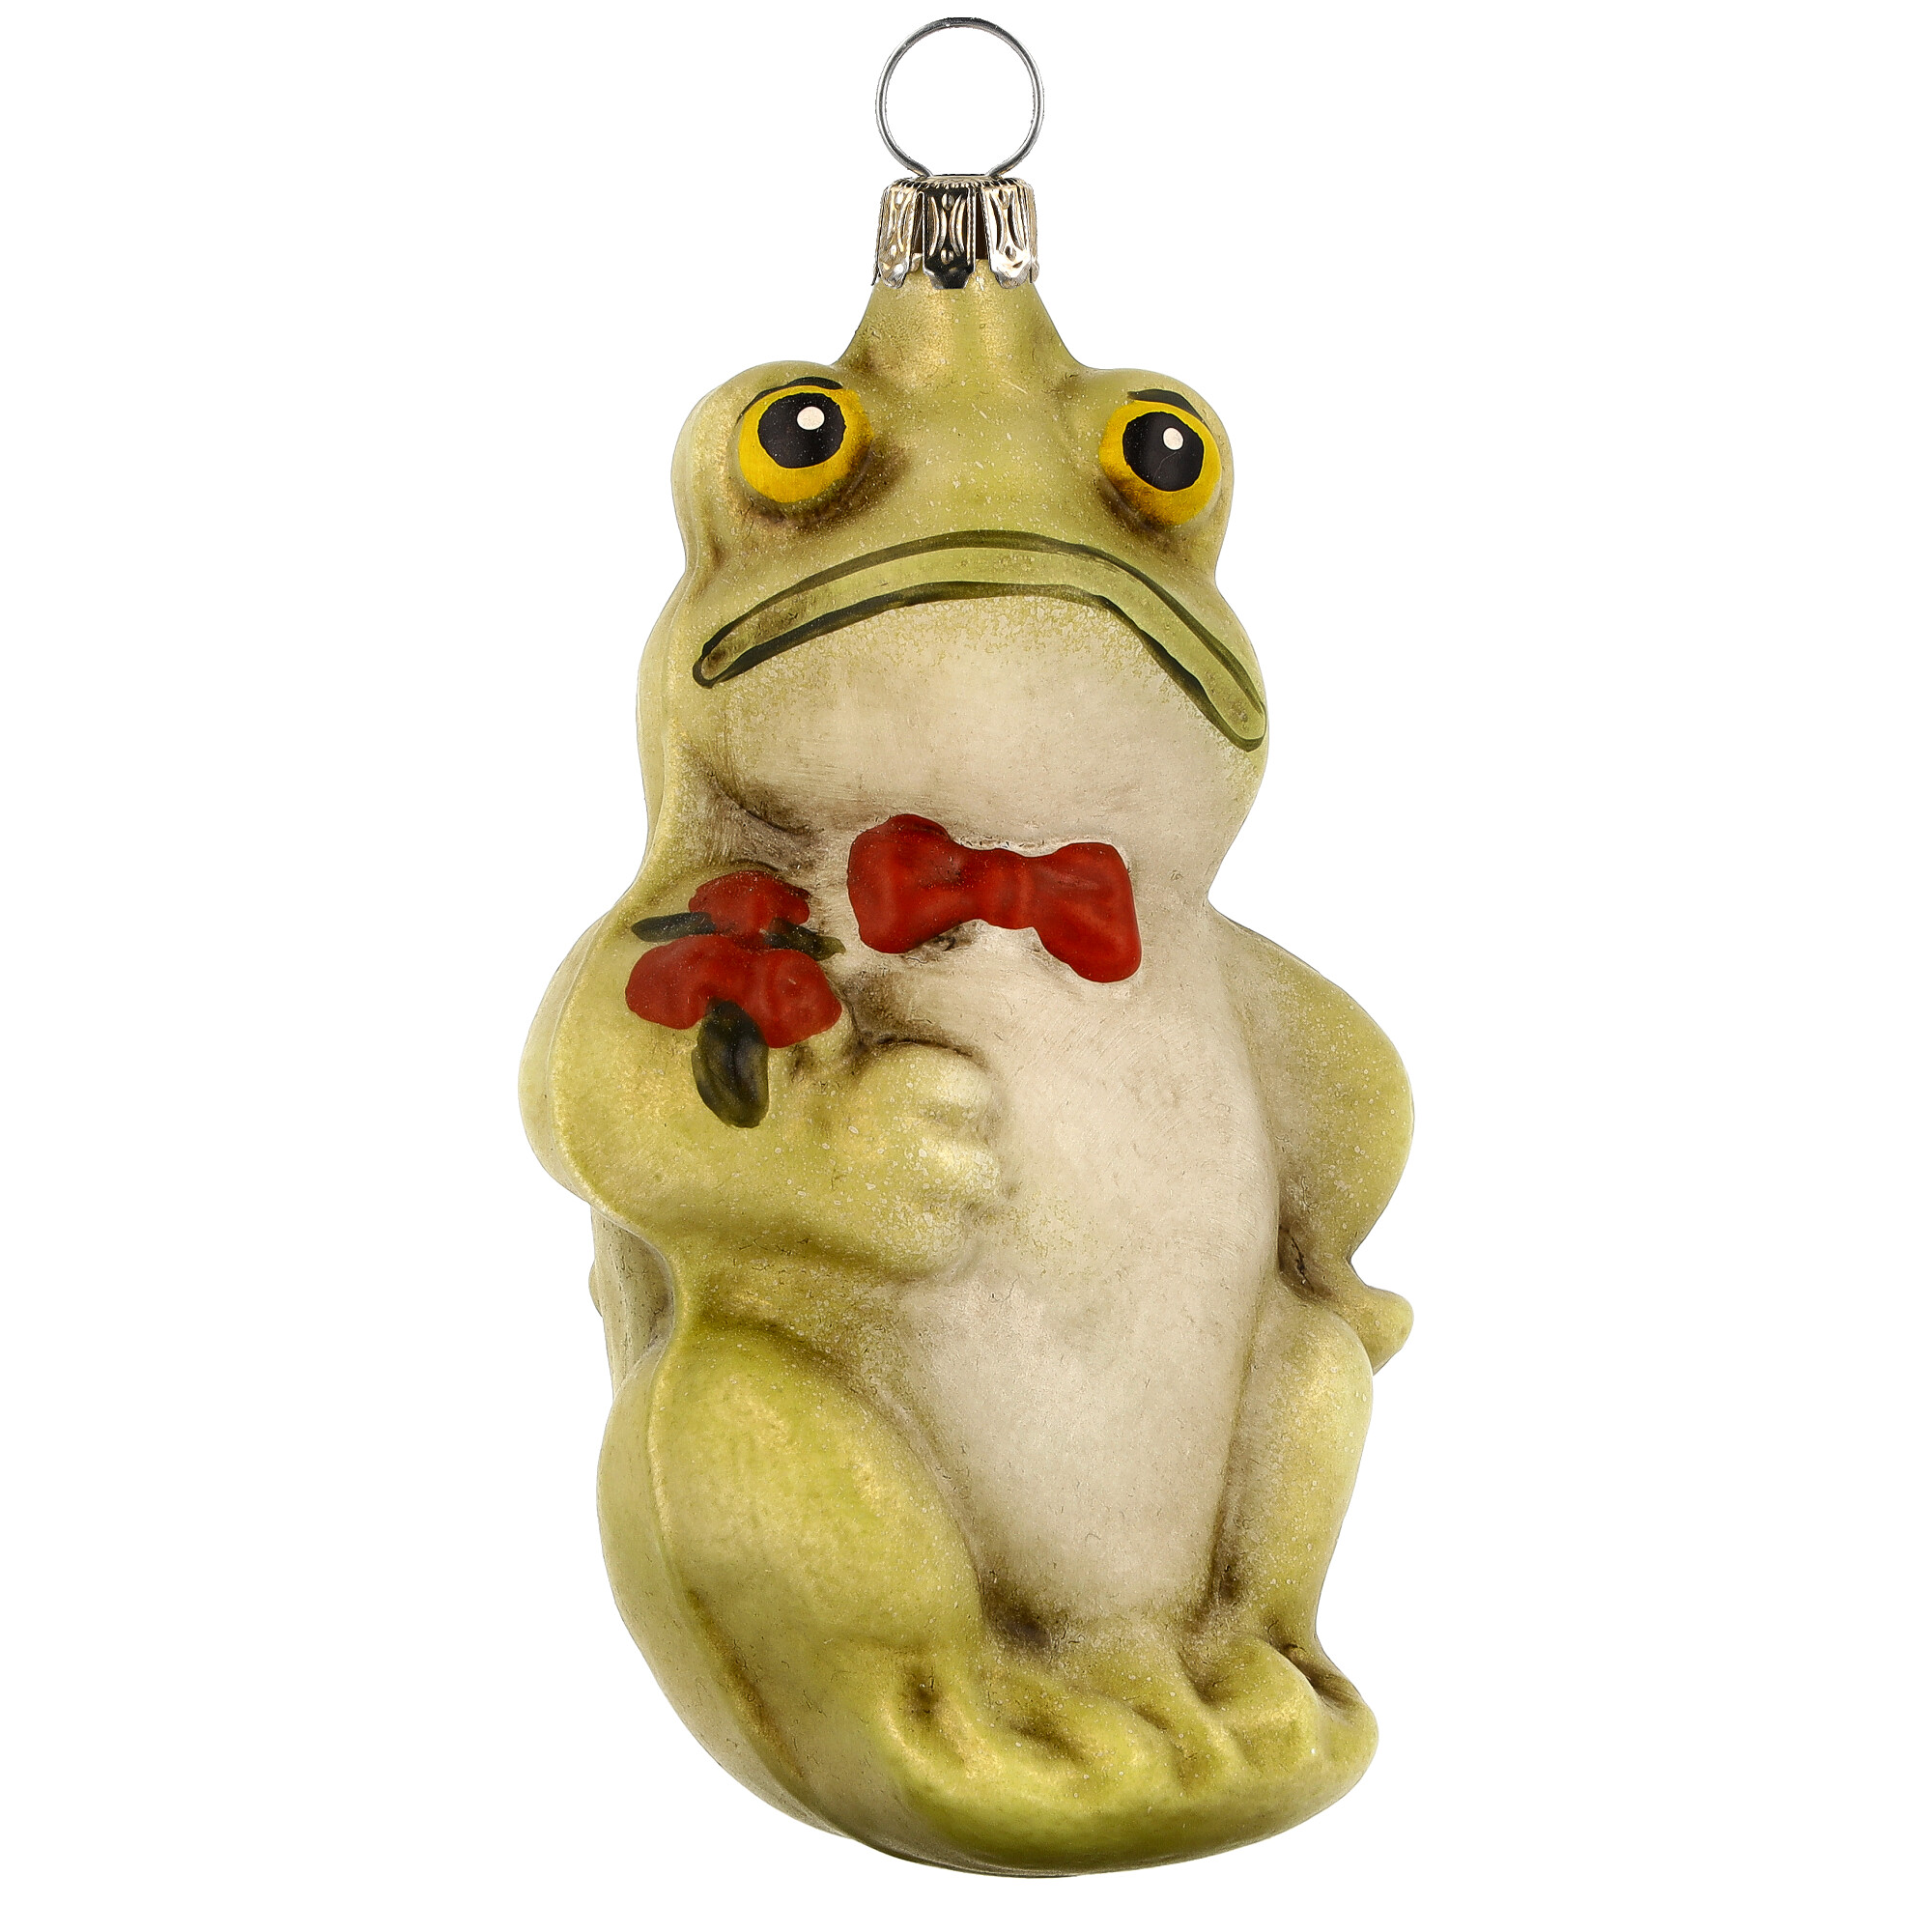 Retro Vintage style Christmas Glass Ornament - Frog with bow tie